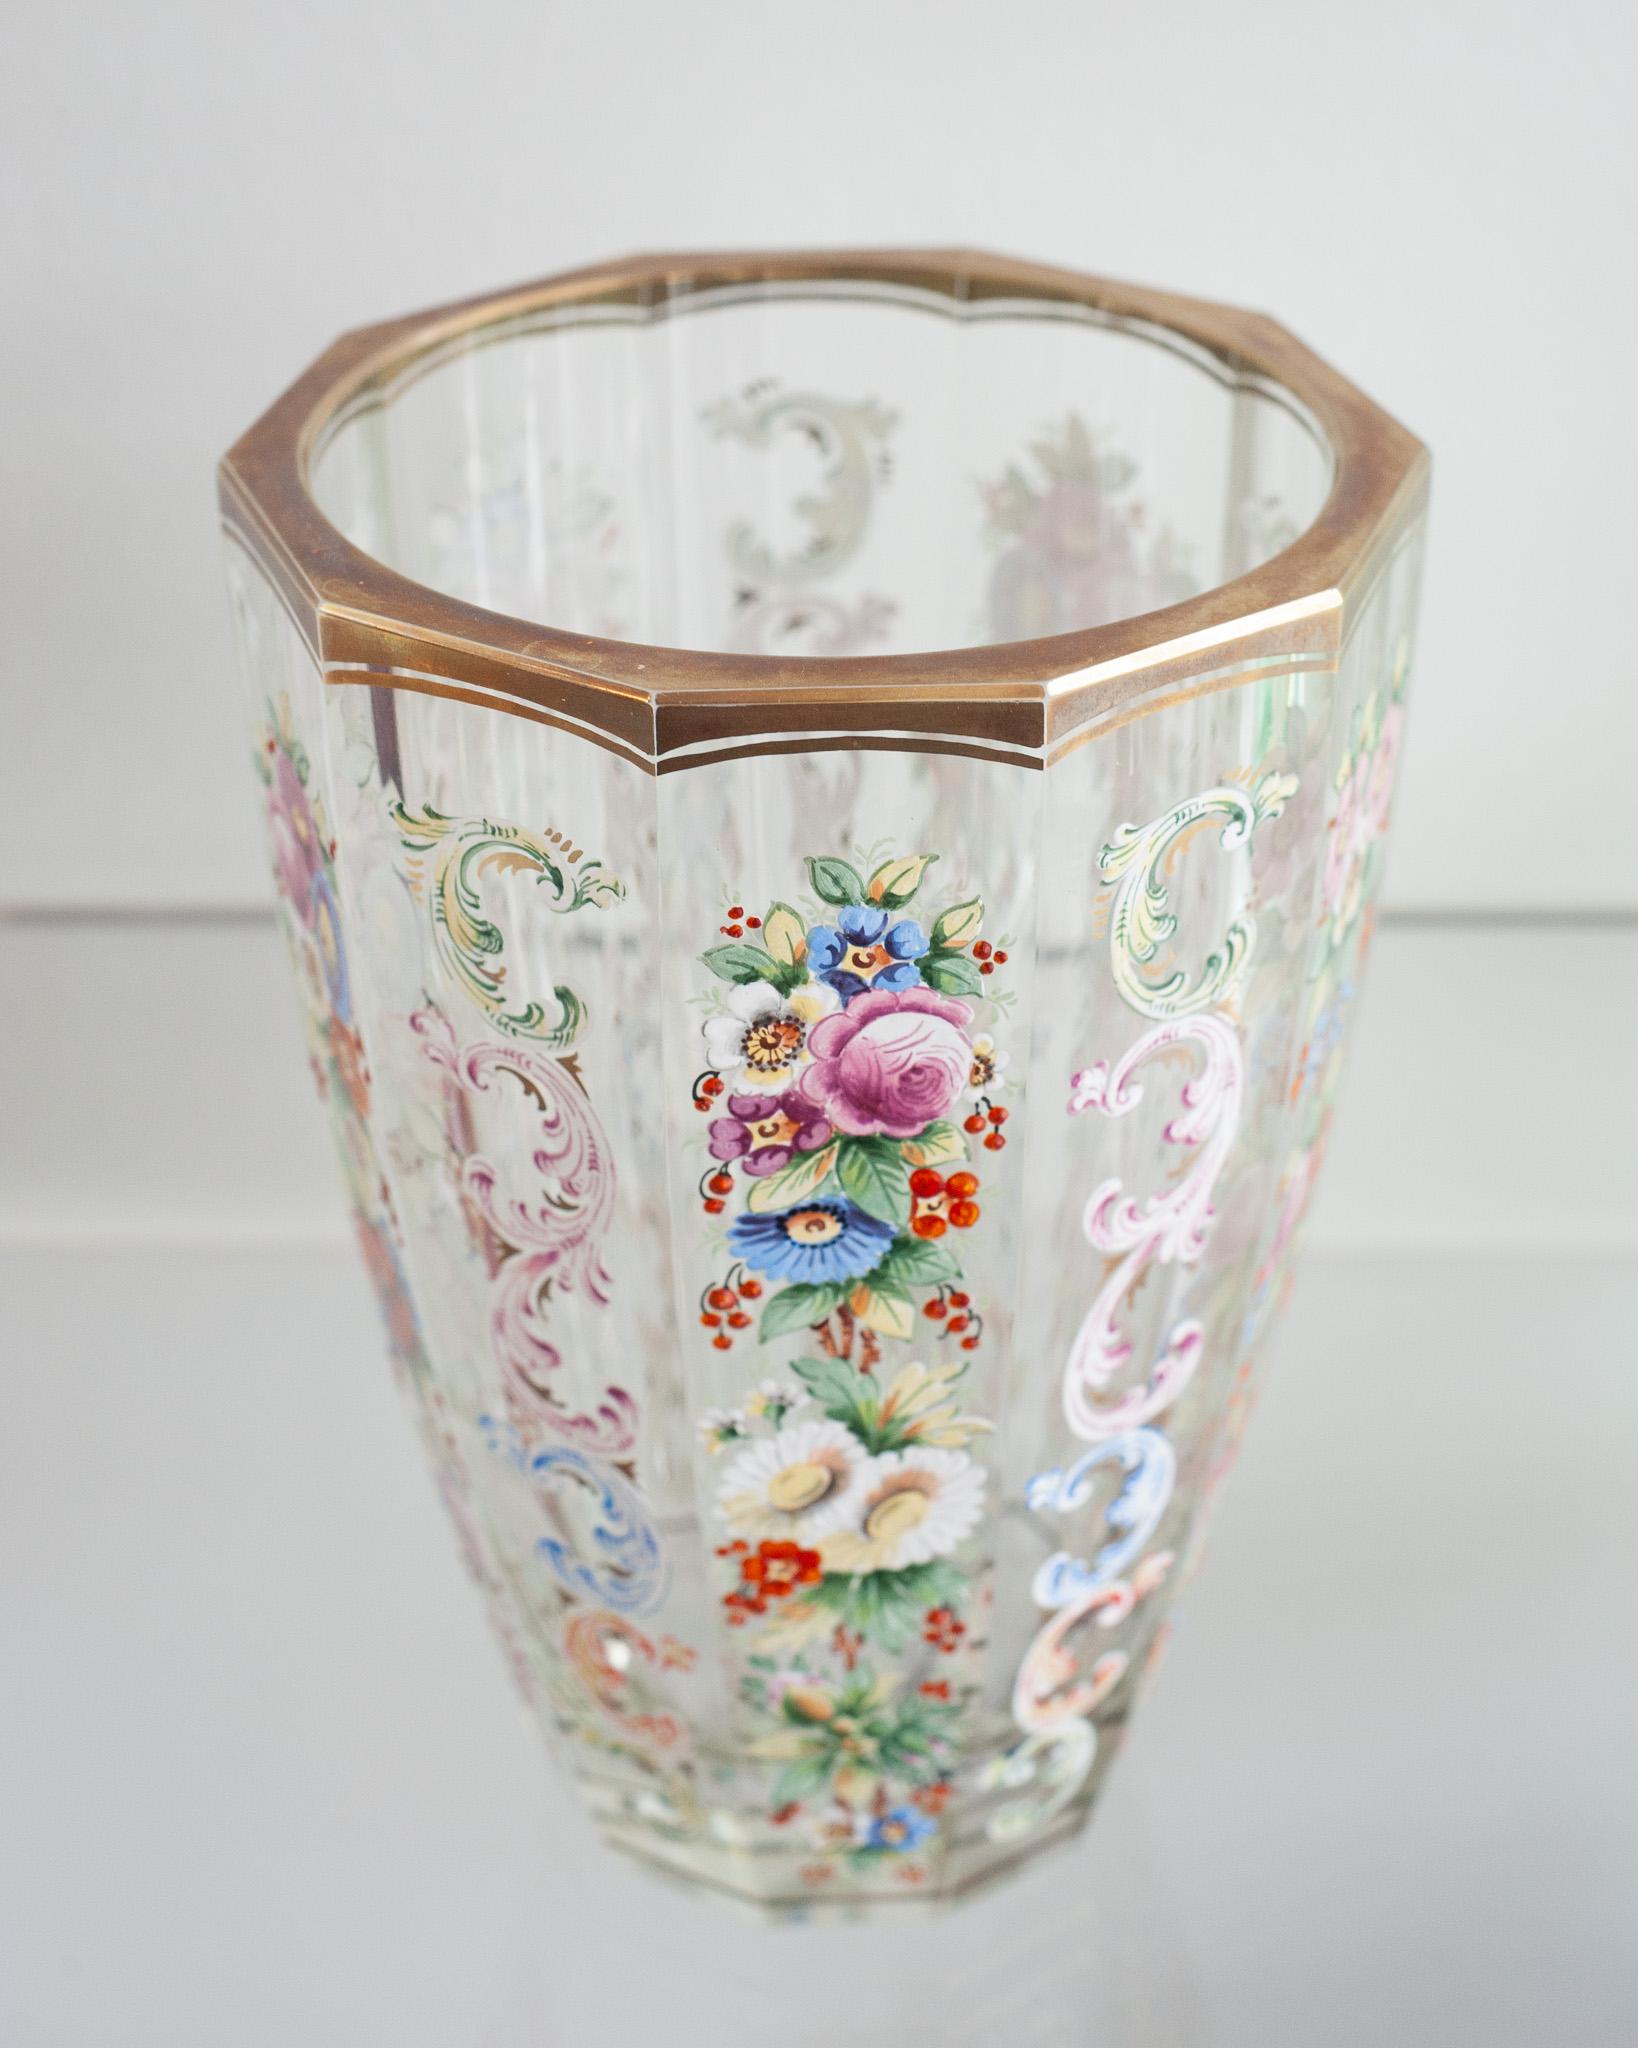 Czech Antique Moser Multicolored Hand Painted Floral and Gilt Vase For Sale